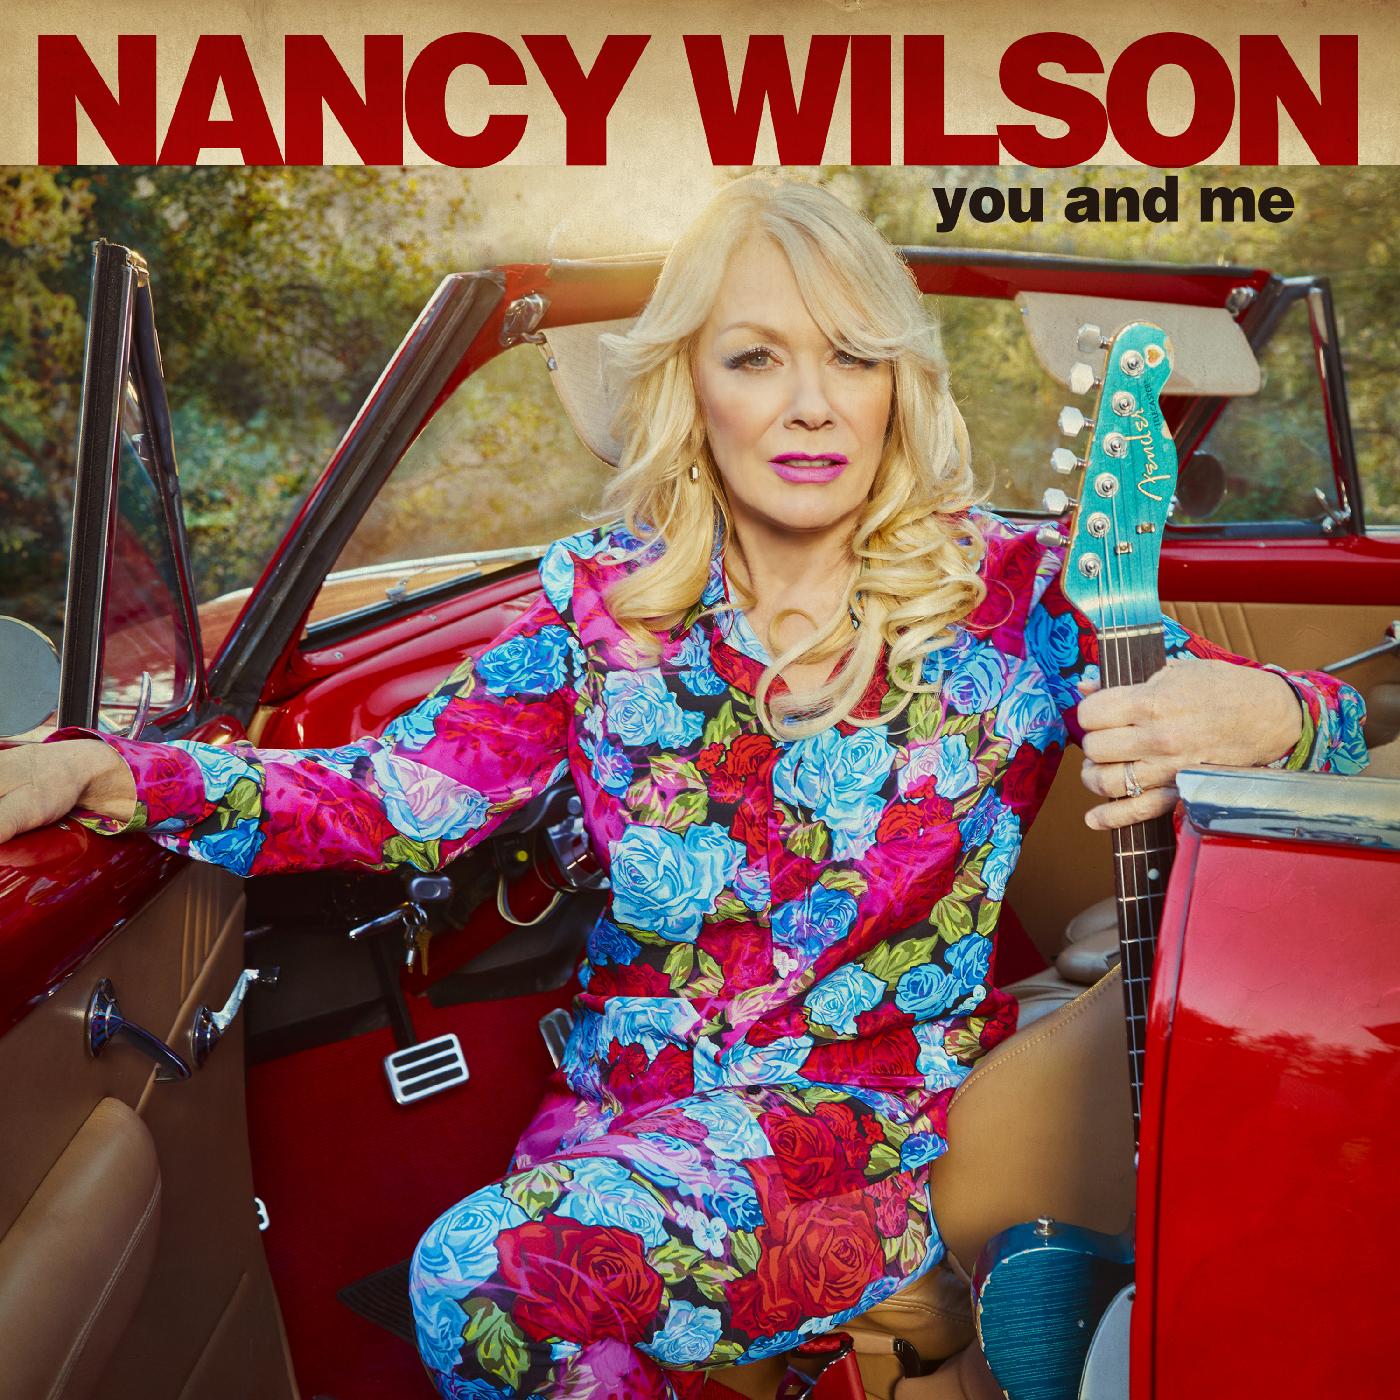 Wilson, Nancy - You And Me - CD - New